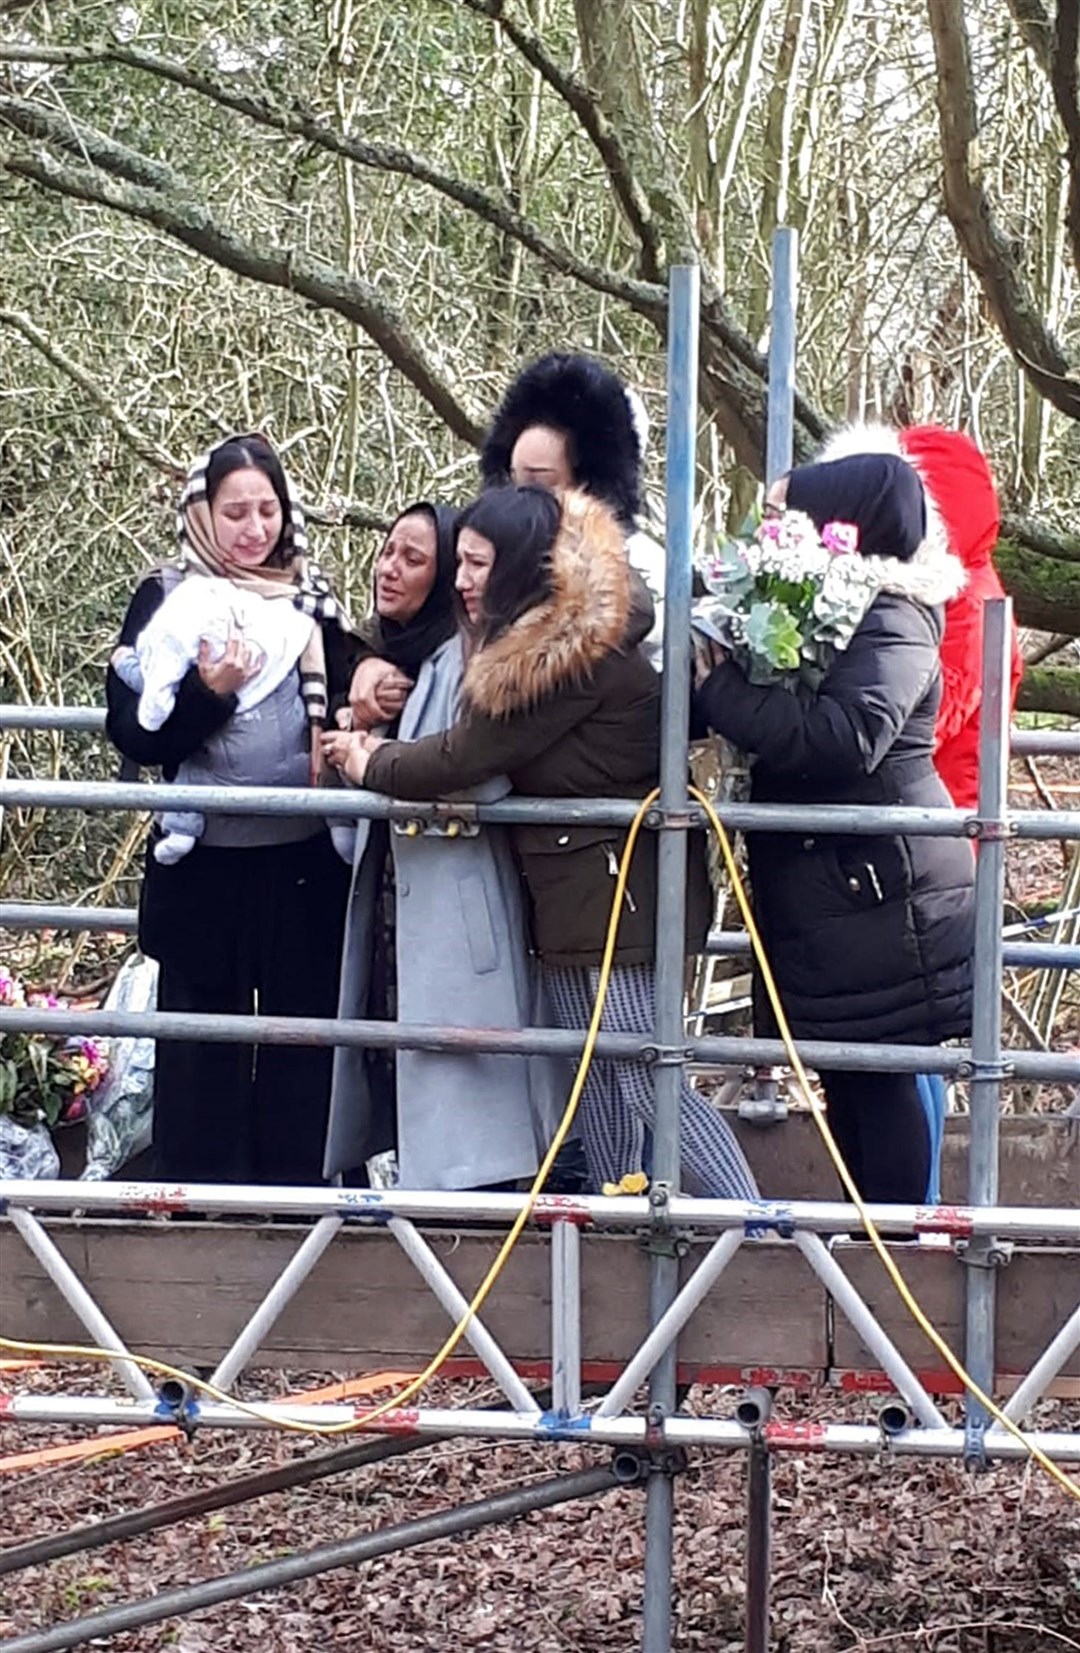 The family of Mohammed Shah Subhani visit the site in Buckinghamshire where his remains were found by police (Metropolitan Police/PA)